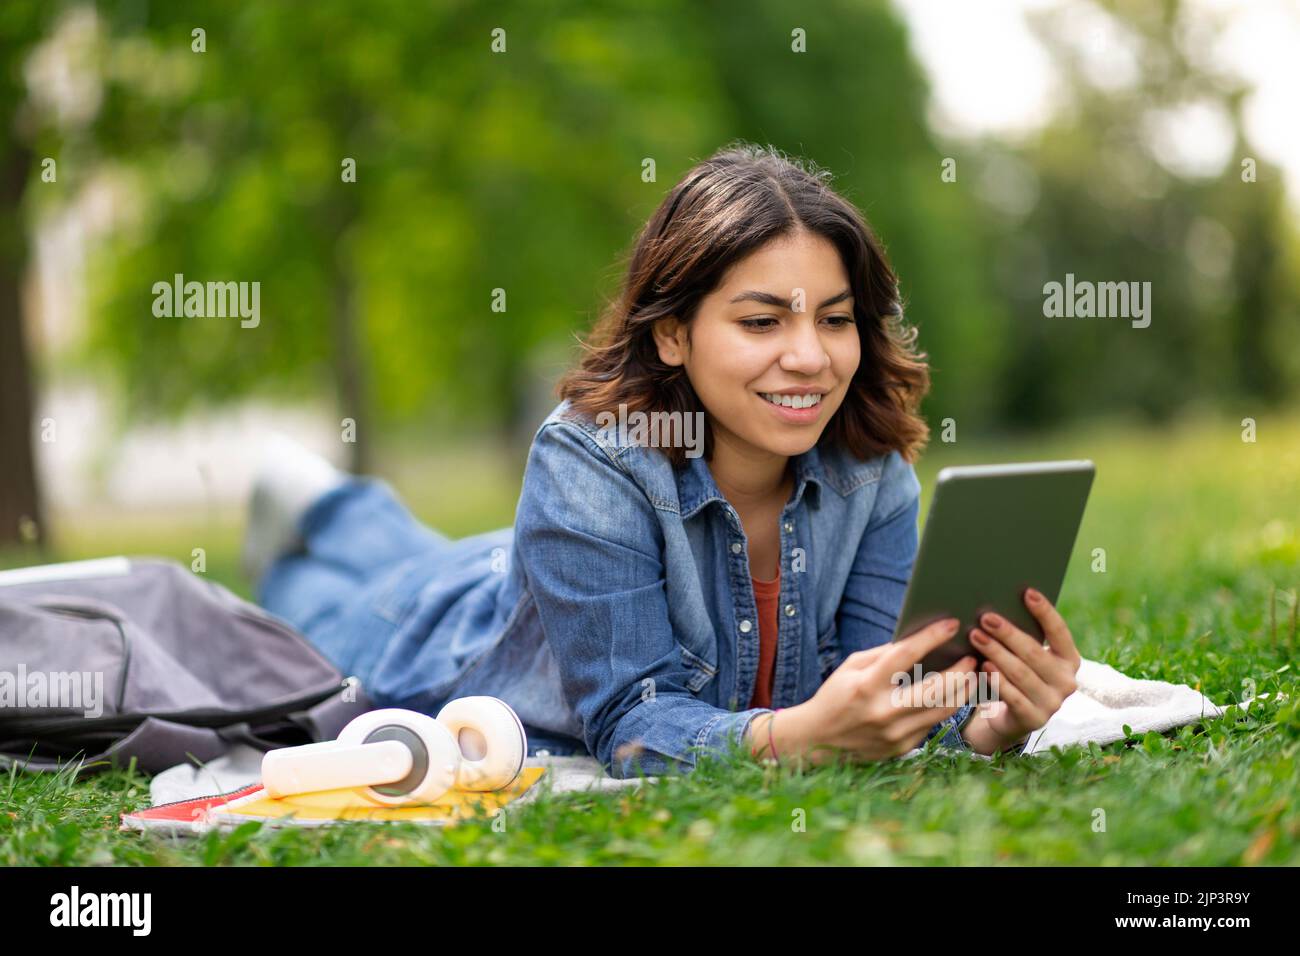 Beautiful Young Arab Woman Relaxing With Digital Tablet On Lawn In Park Stock Photo